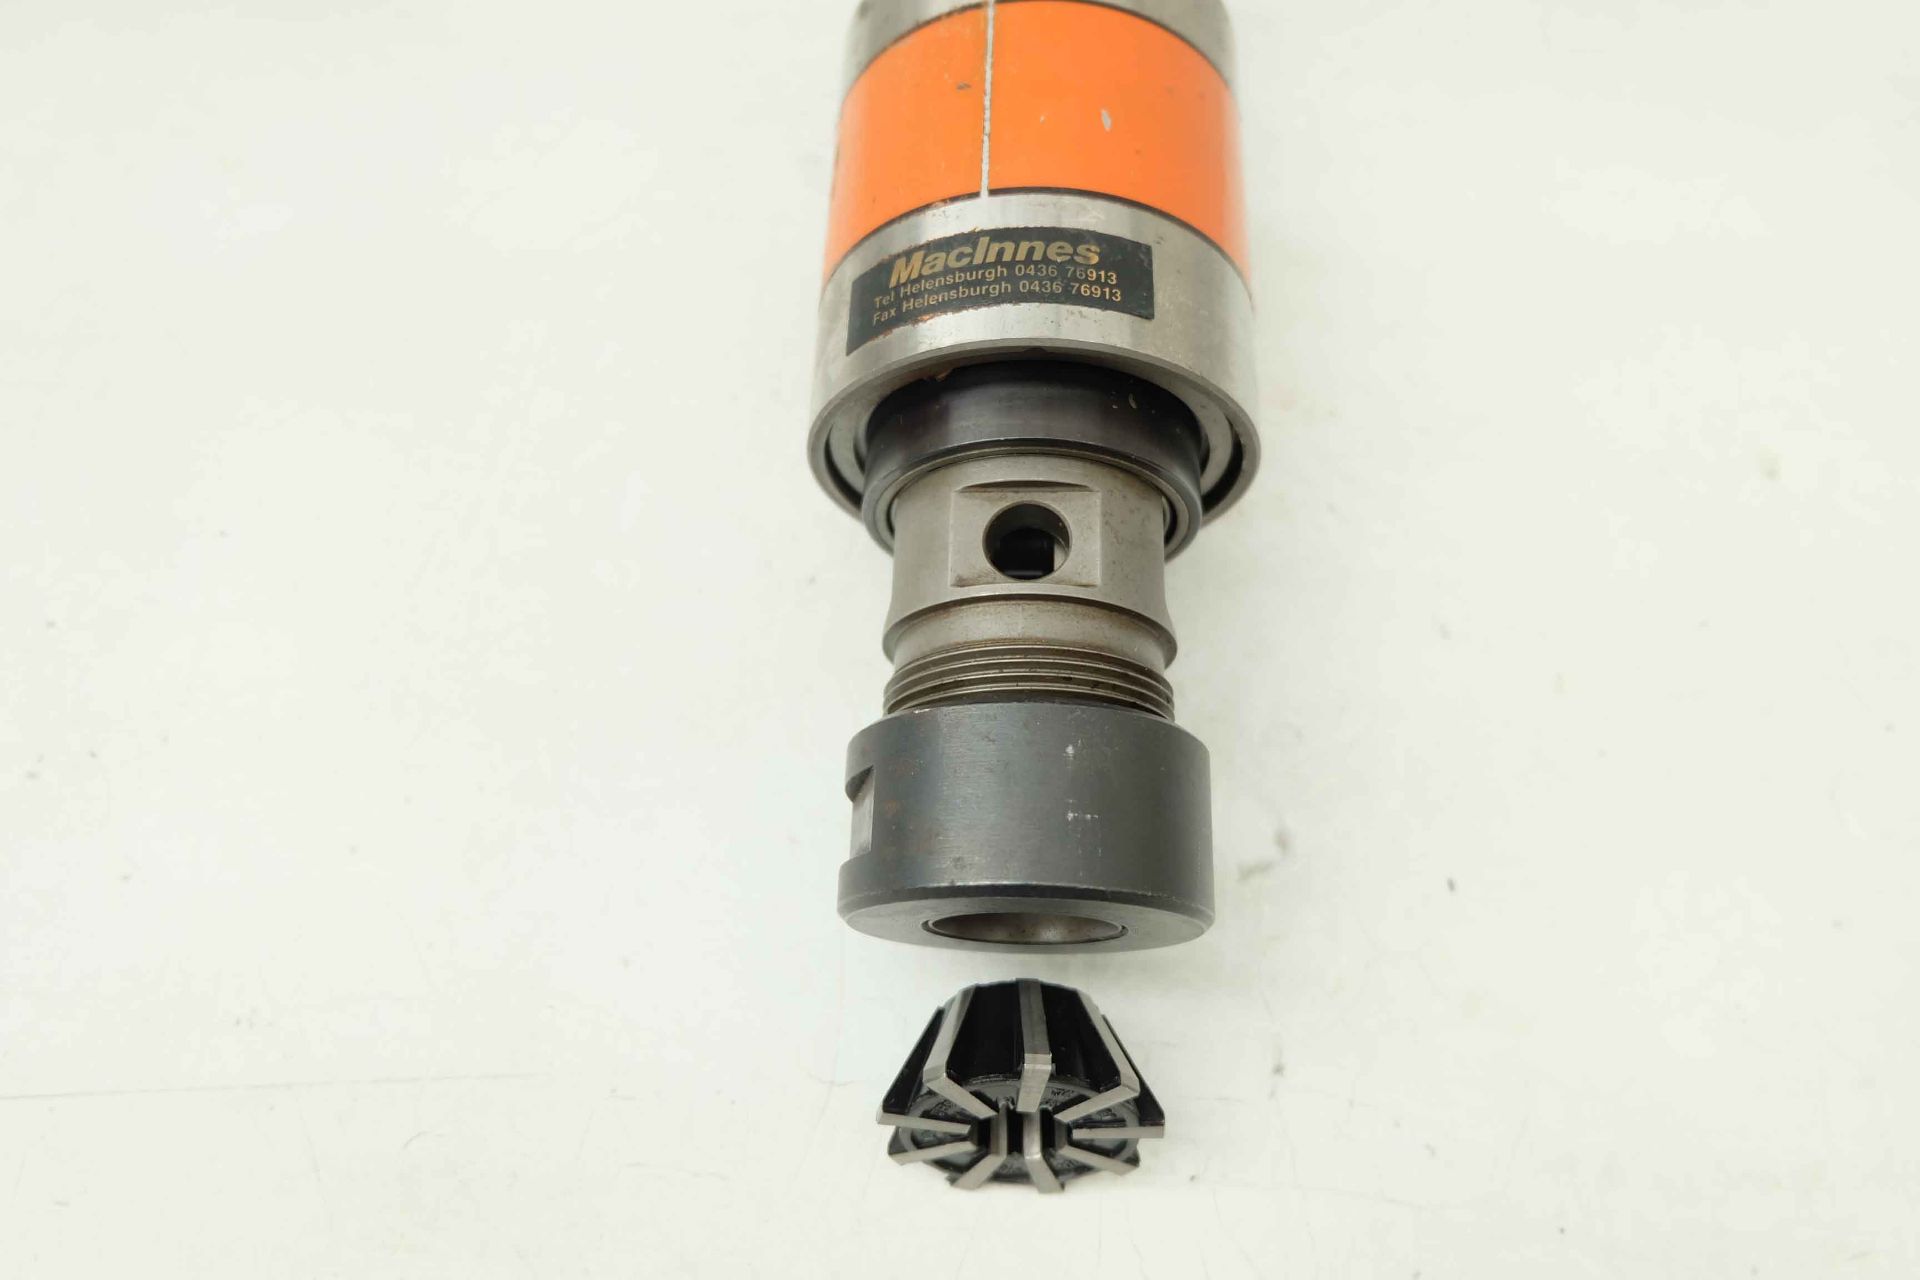 Edalco Edalmatic Tapping Attachment With Jacobs 10 - 16mm Collet. Shank Size 32mm Diameter. - Image 2 of 7